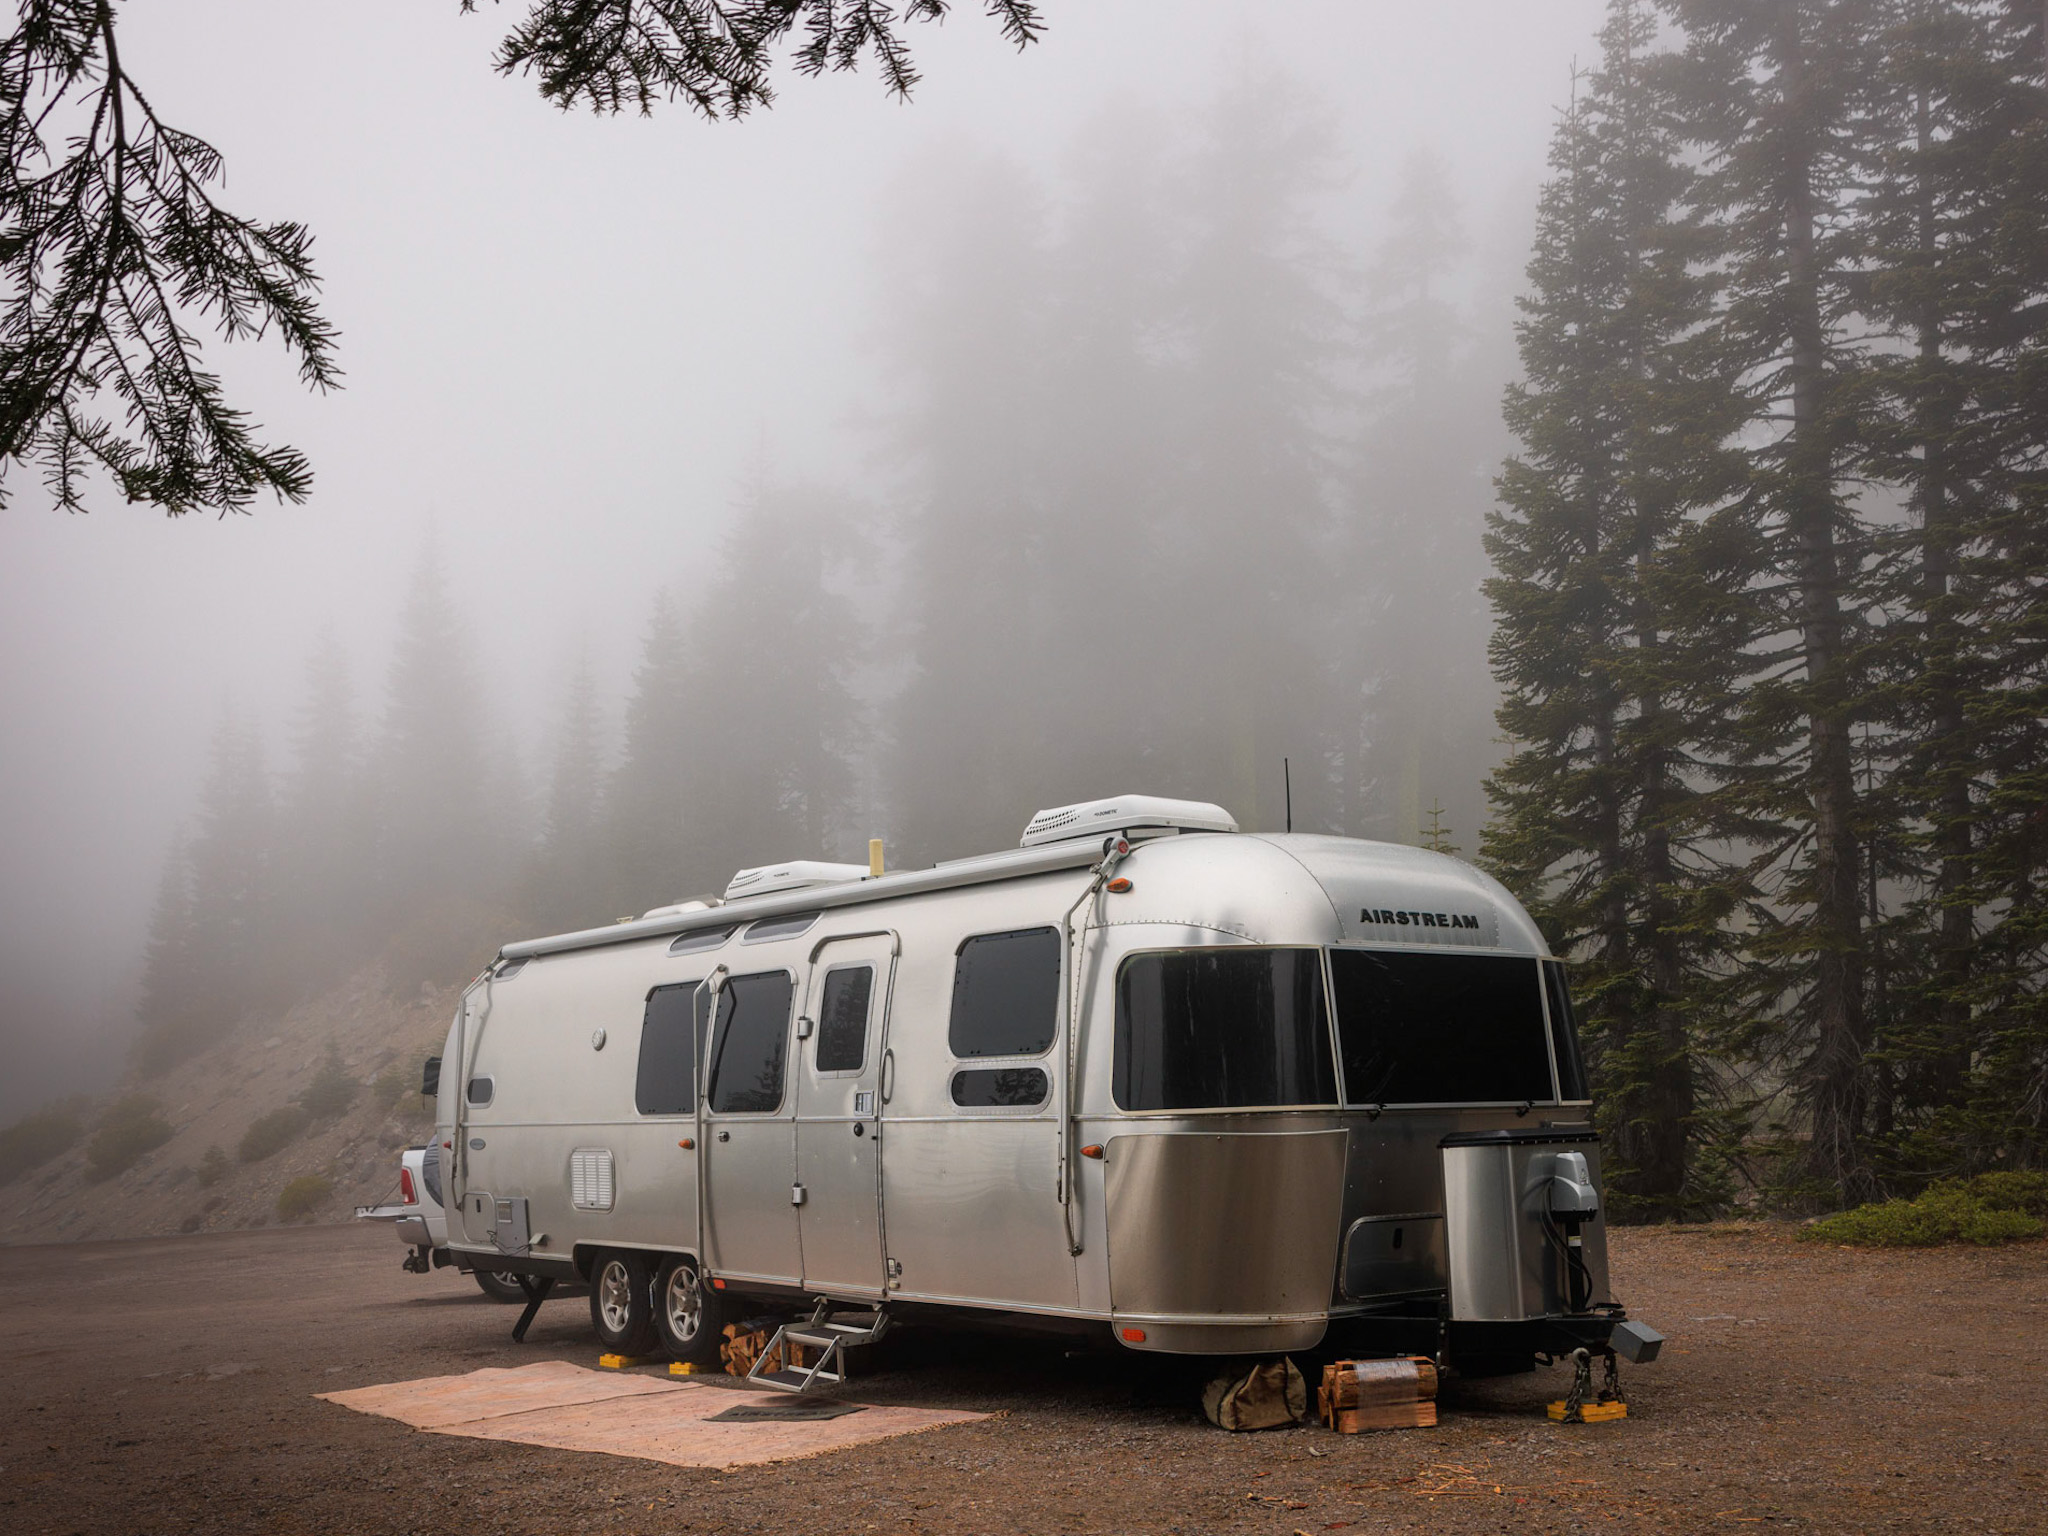 Karen Blue's Airstream in a foggy forest